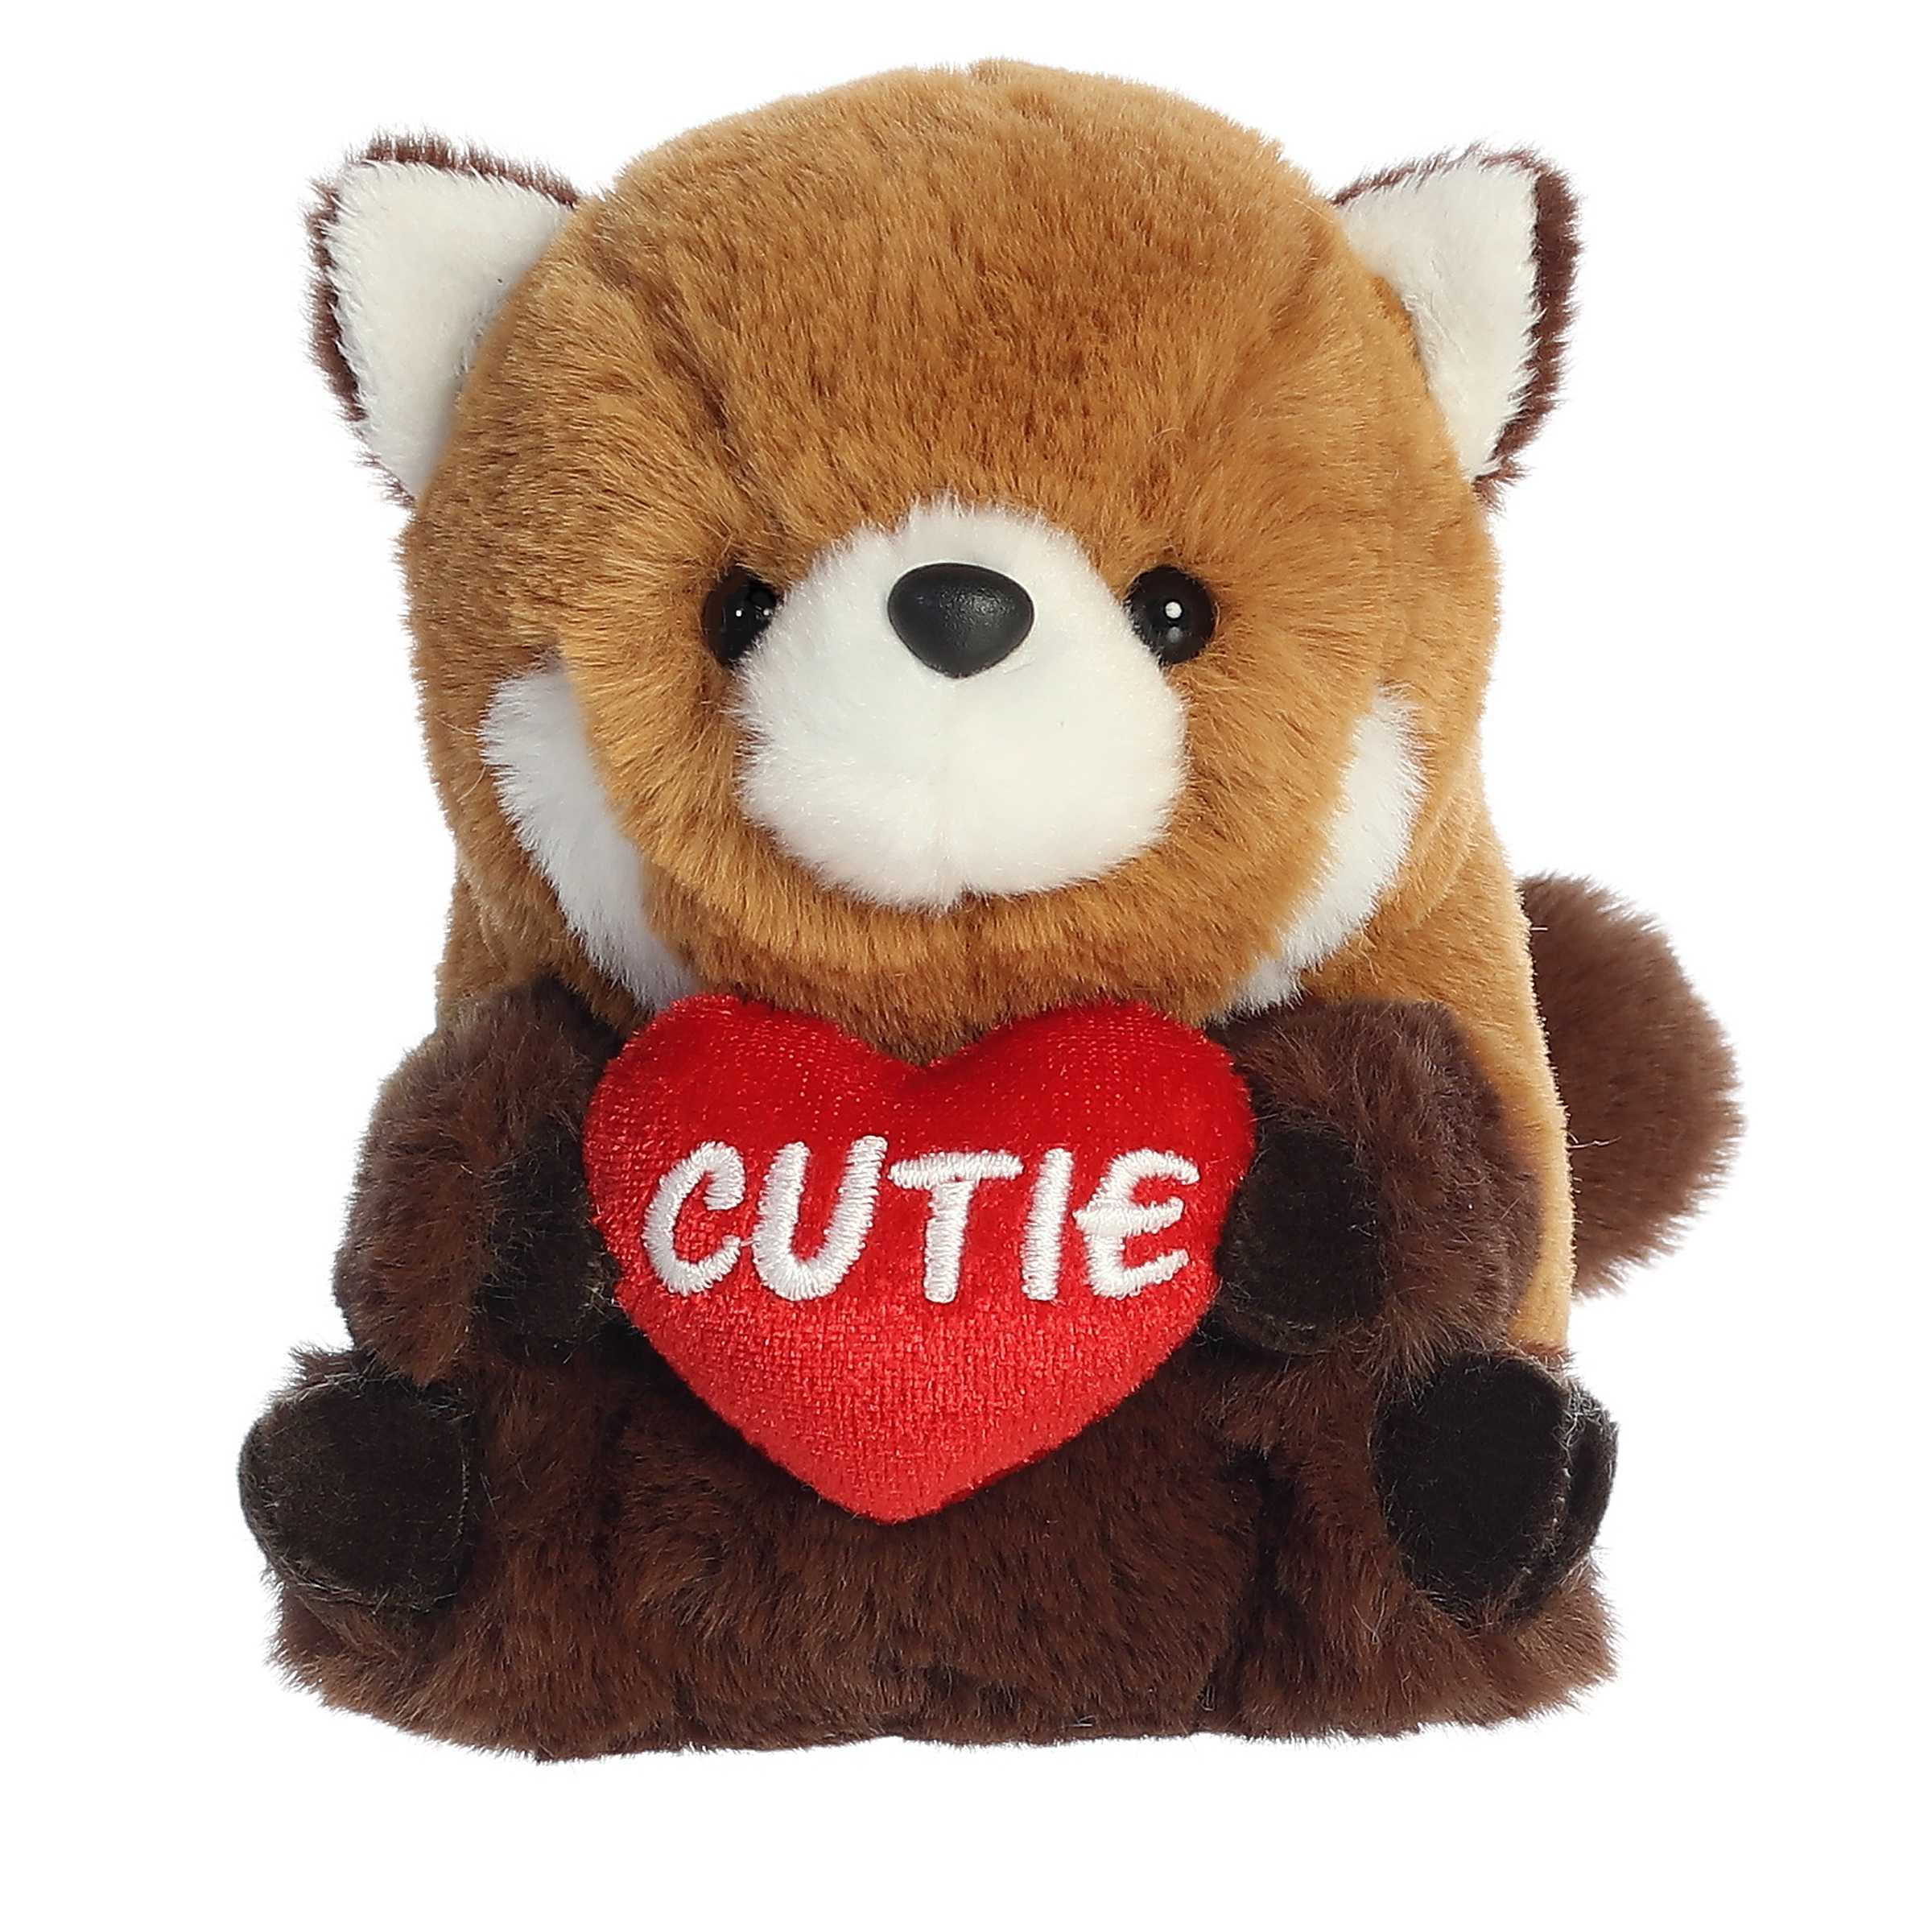 A burnt orange-colored red panda plush from Rolly Pets, holding a 'Cutie' heart, in a playful, balanced pose.